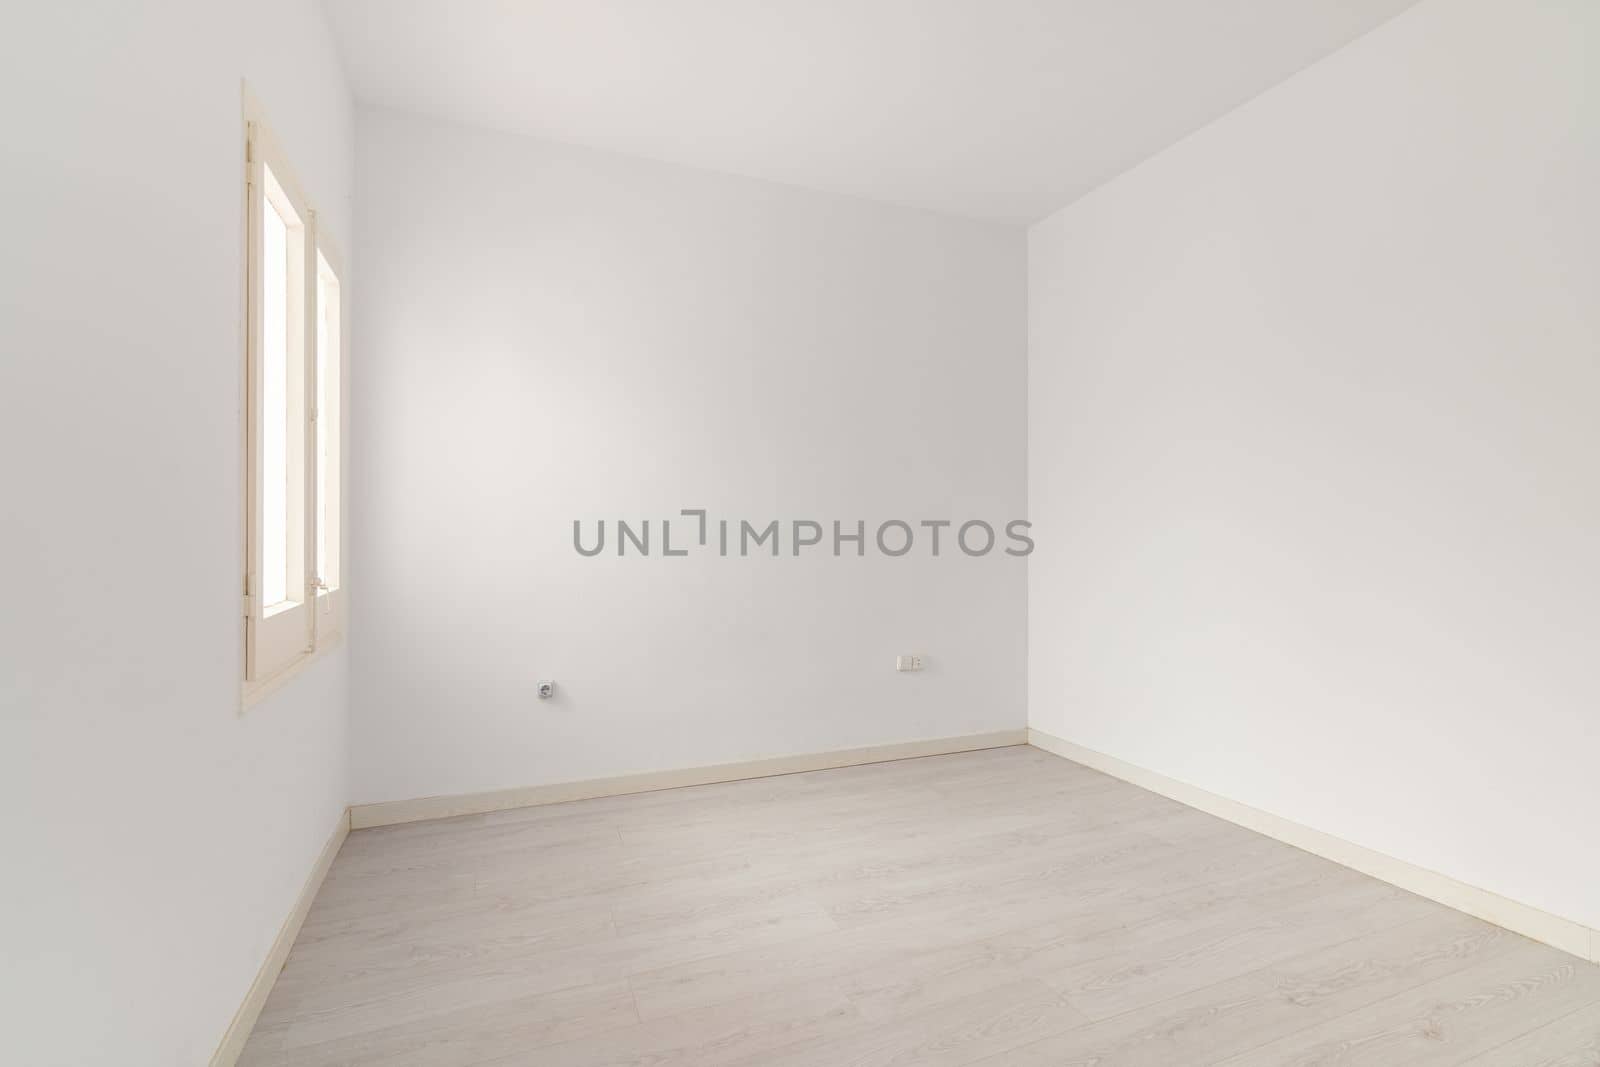 View of an empty white bright room with window without furniture after painting and renovation with wooden floor and baseboards. Concept of beautiful laconic interior for various inspiring ideas.